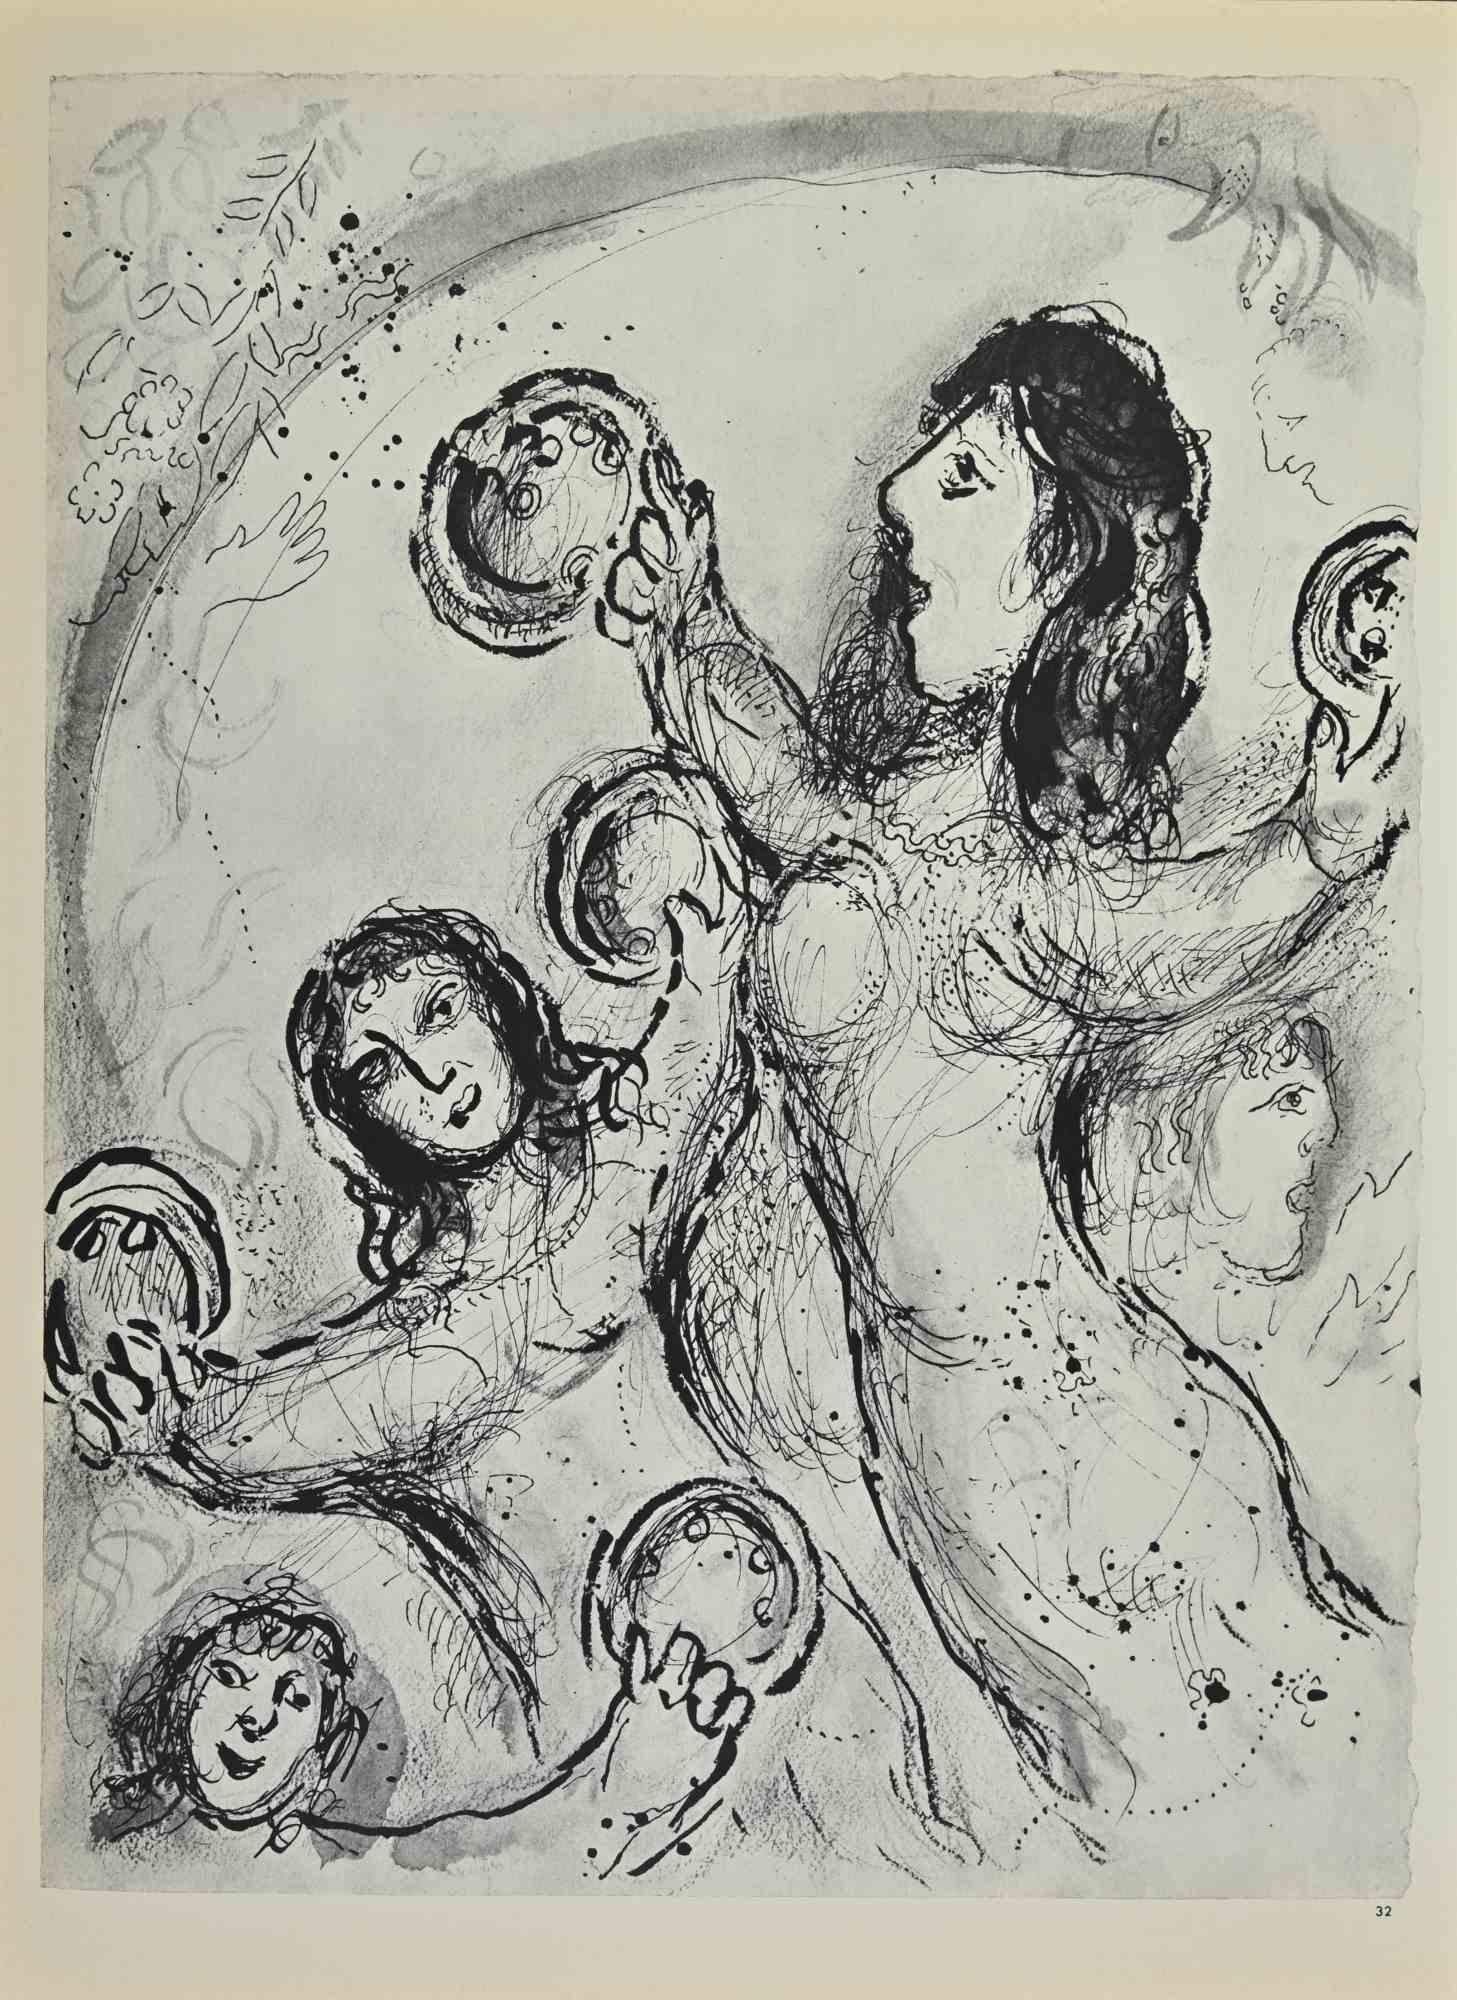 Miriam and the Prophetess  is an artwork realized by March Chagall, 1960s.

Lithograph on brown-toned paper, no signature.

Lithograph on both sheets.

Edition of 6500 unsigned lithographs. Printed by Mourlot and published by Tériade, Paris.

Ref.